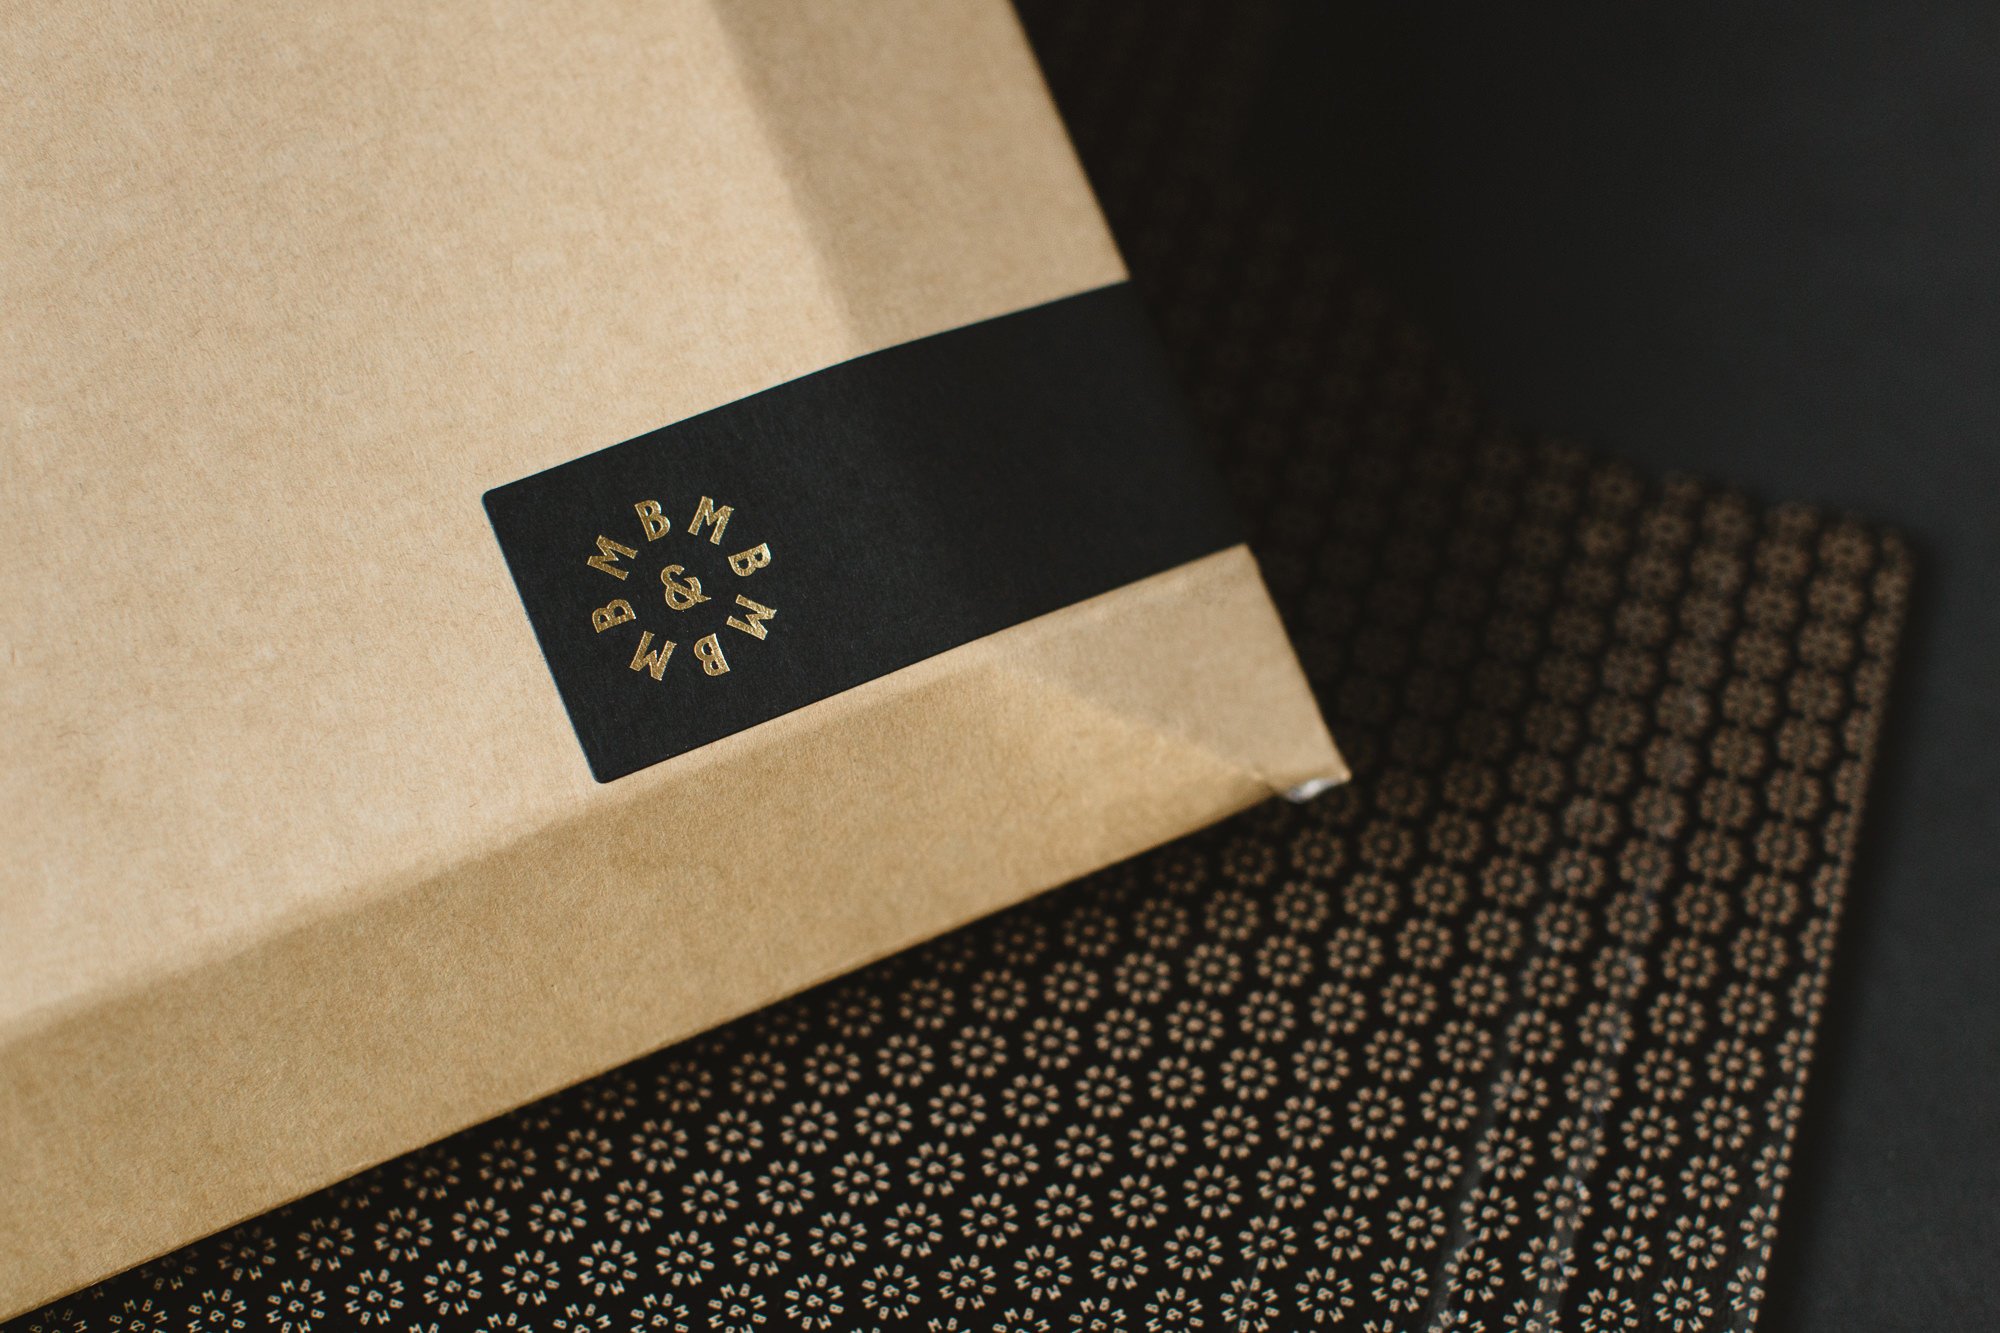 Think Packaging – Bayly & Moore. The brilliant madness of love